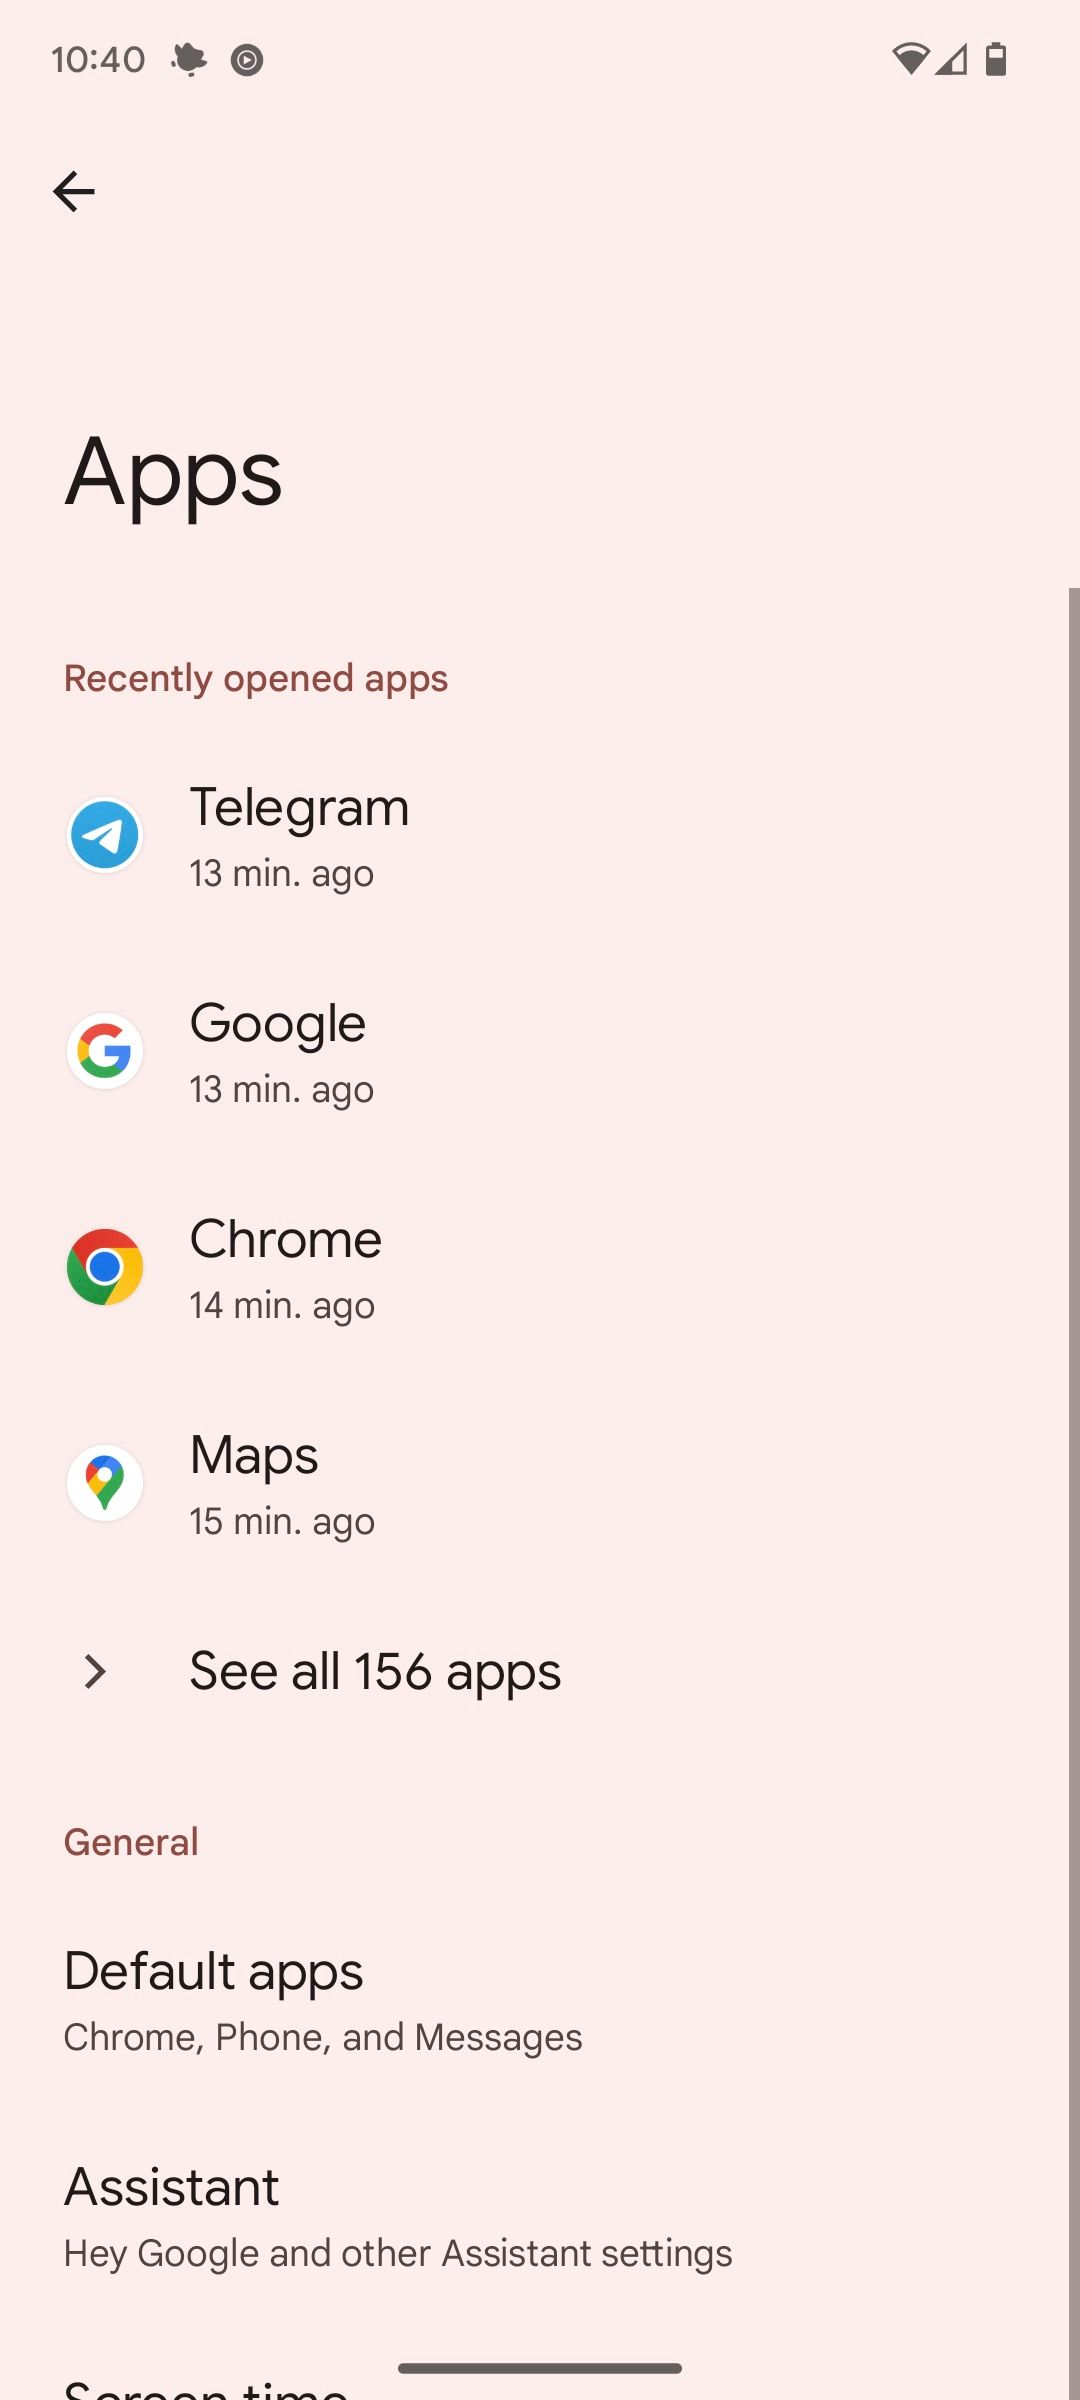 A screenshot of the apps settings menu on a Pixel with a pastel orange background.